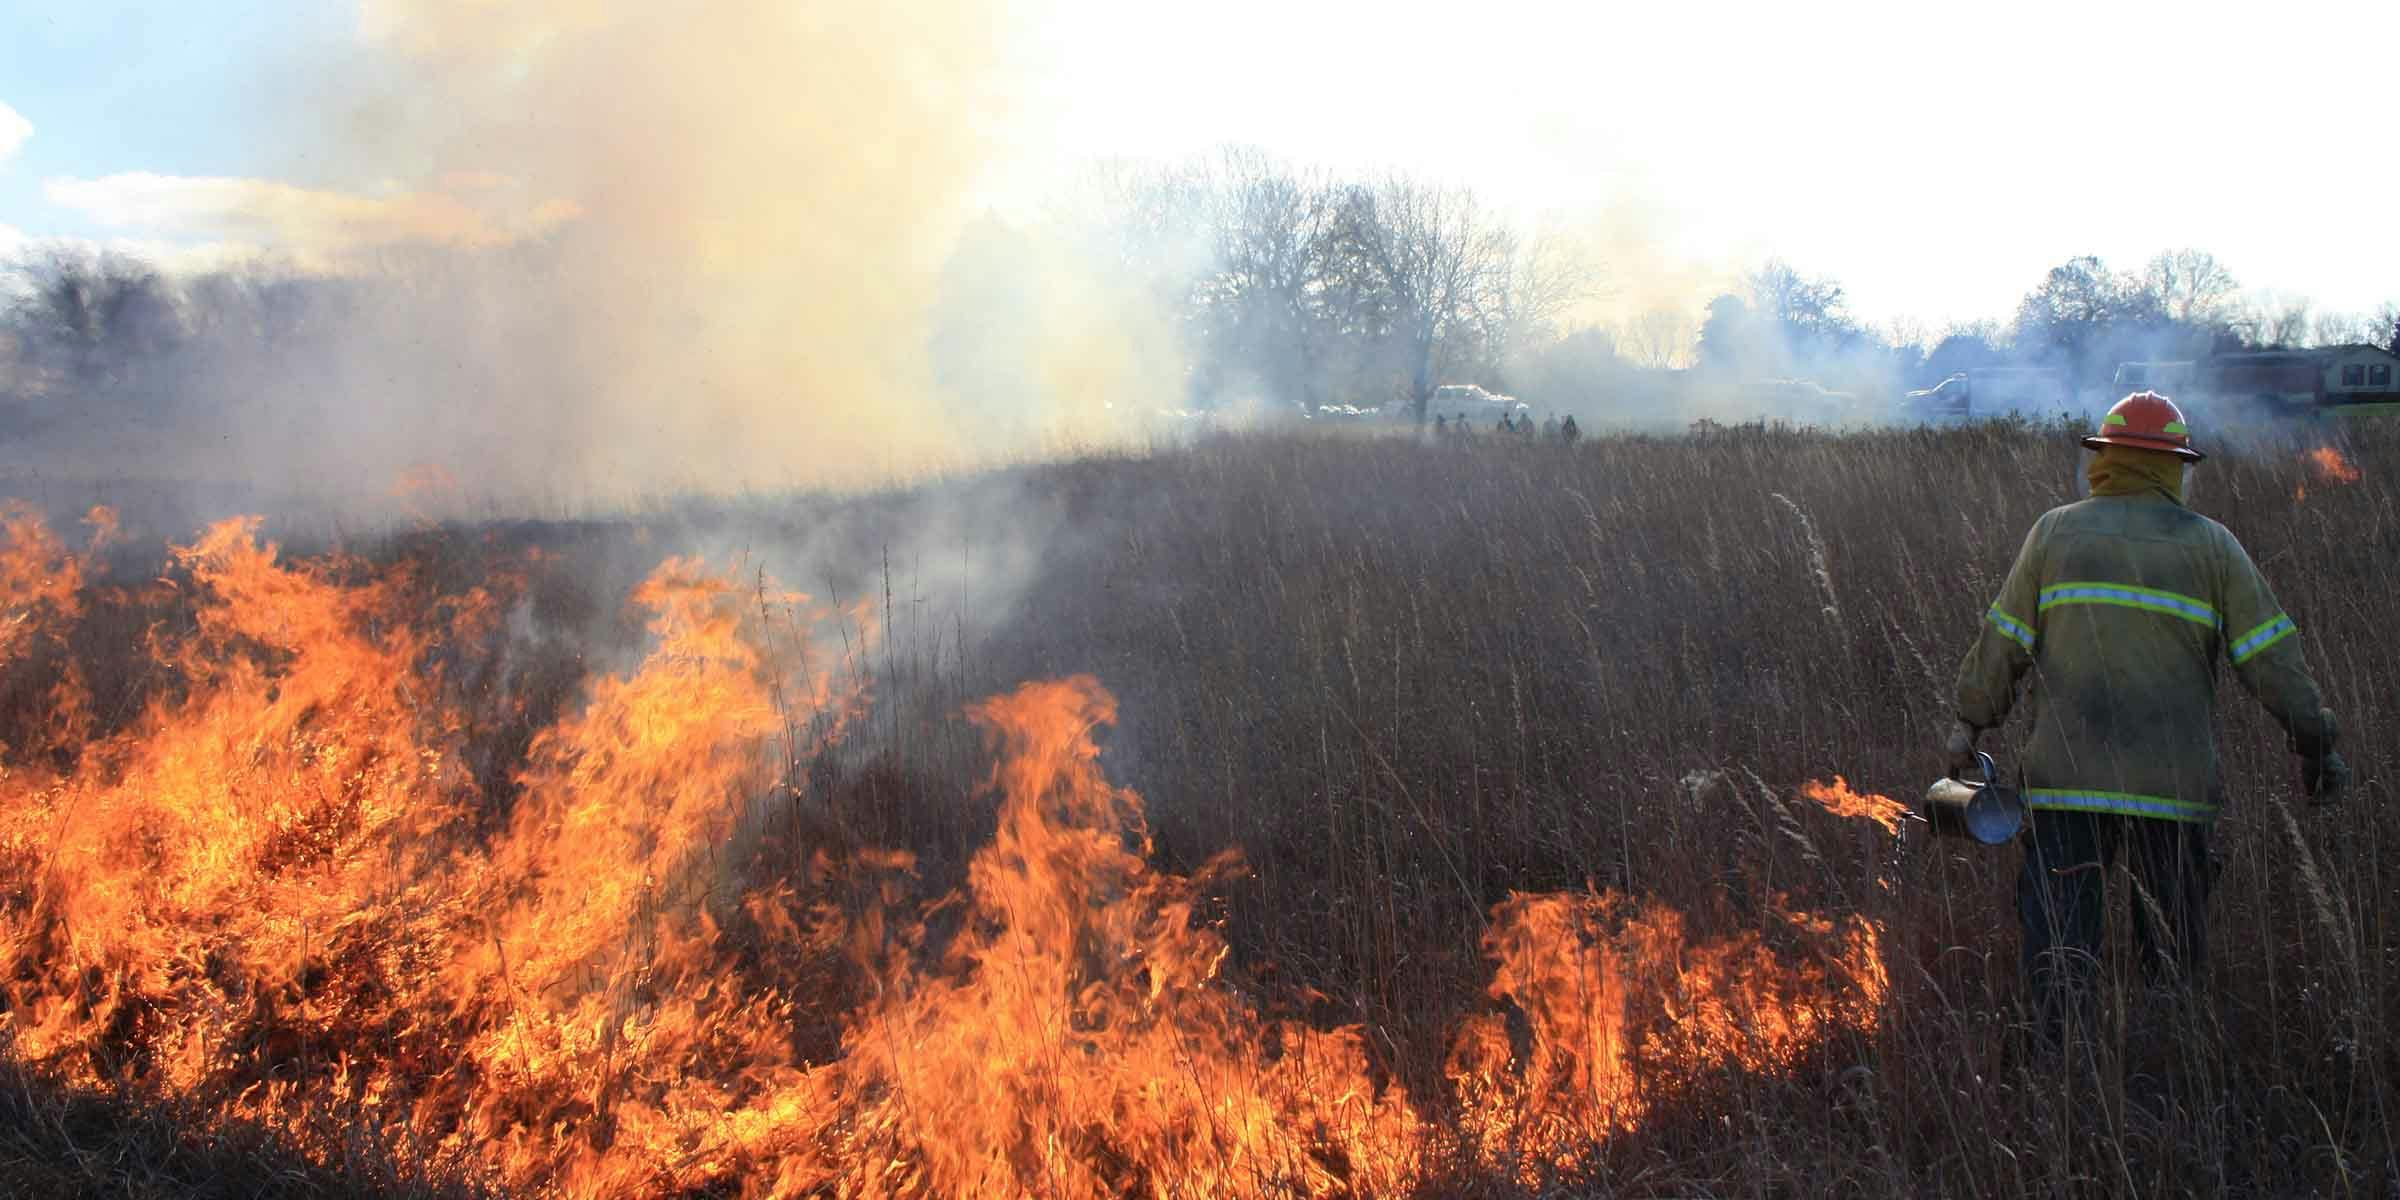 A firefighter spreading controlled fire in a prairie with tall grass